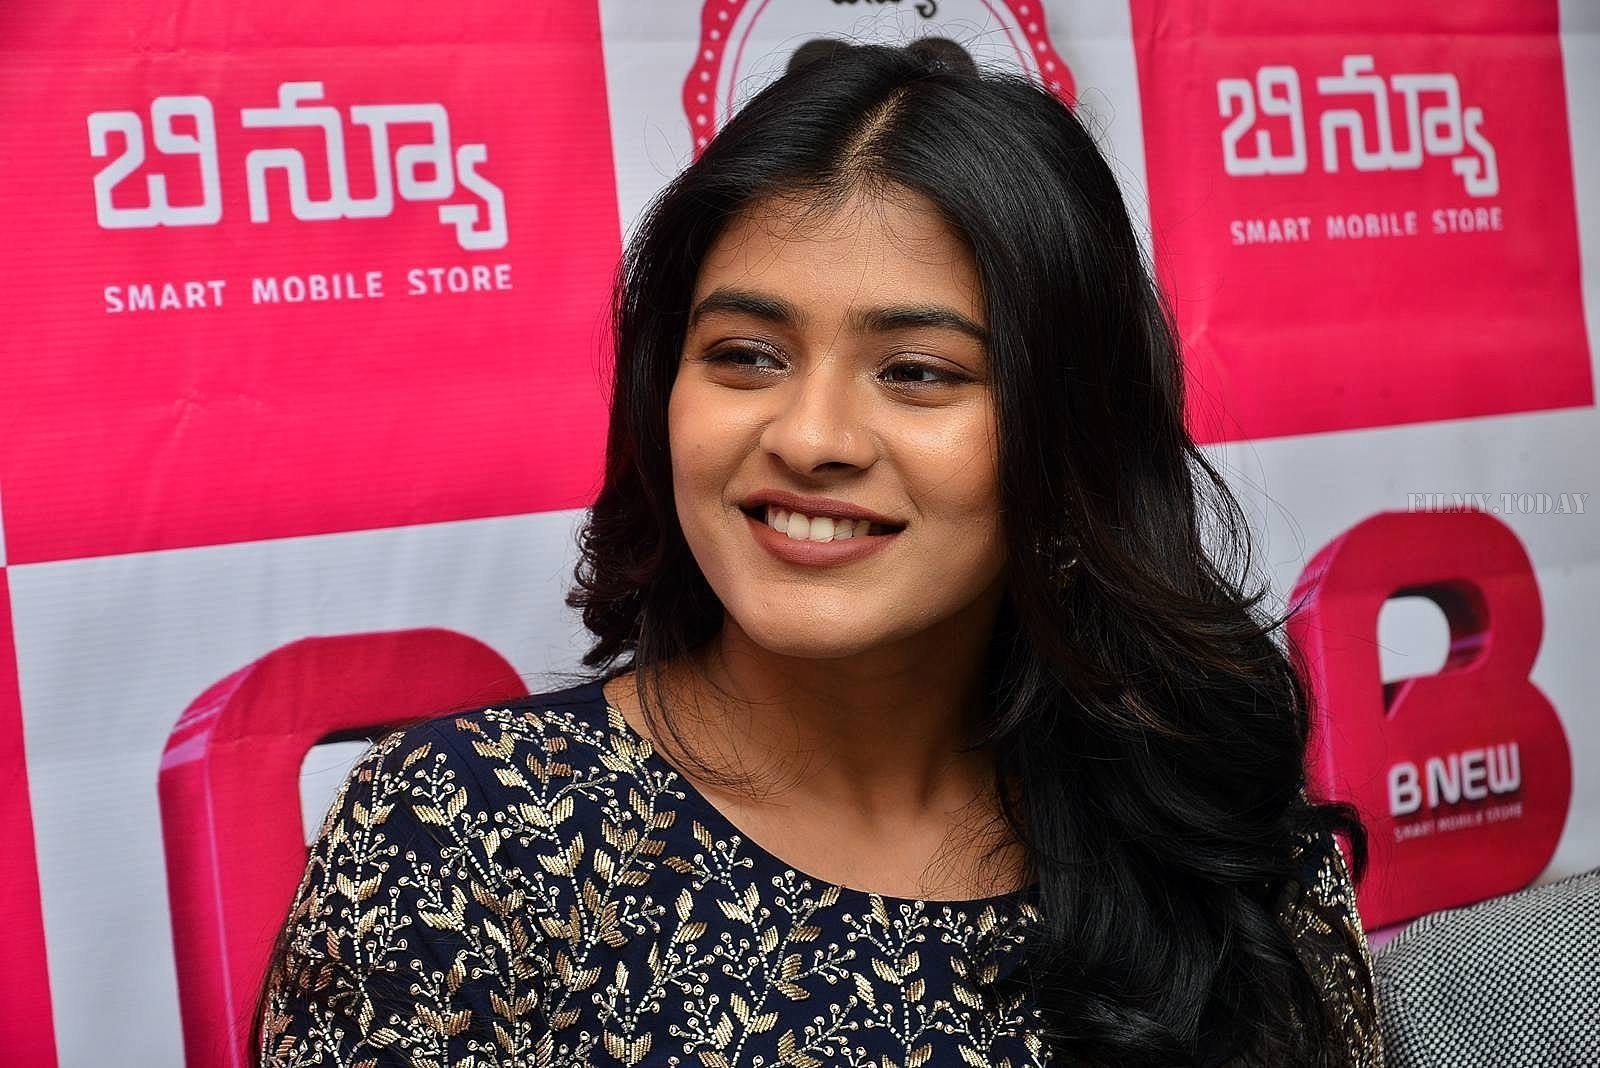 Actress Hebah Patel launches B New Mobile Store at Chirala Photos | Picture 1556585